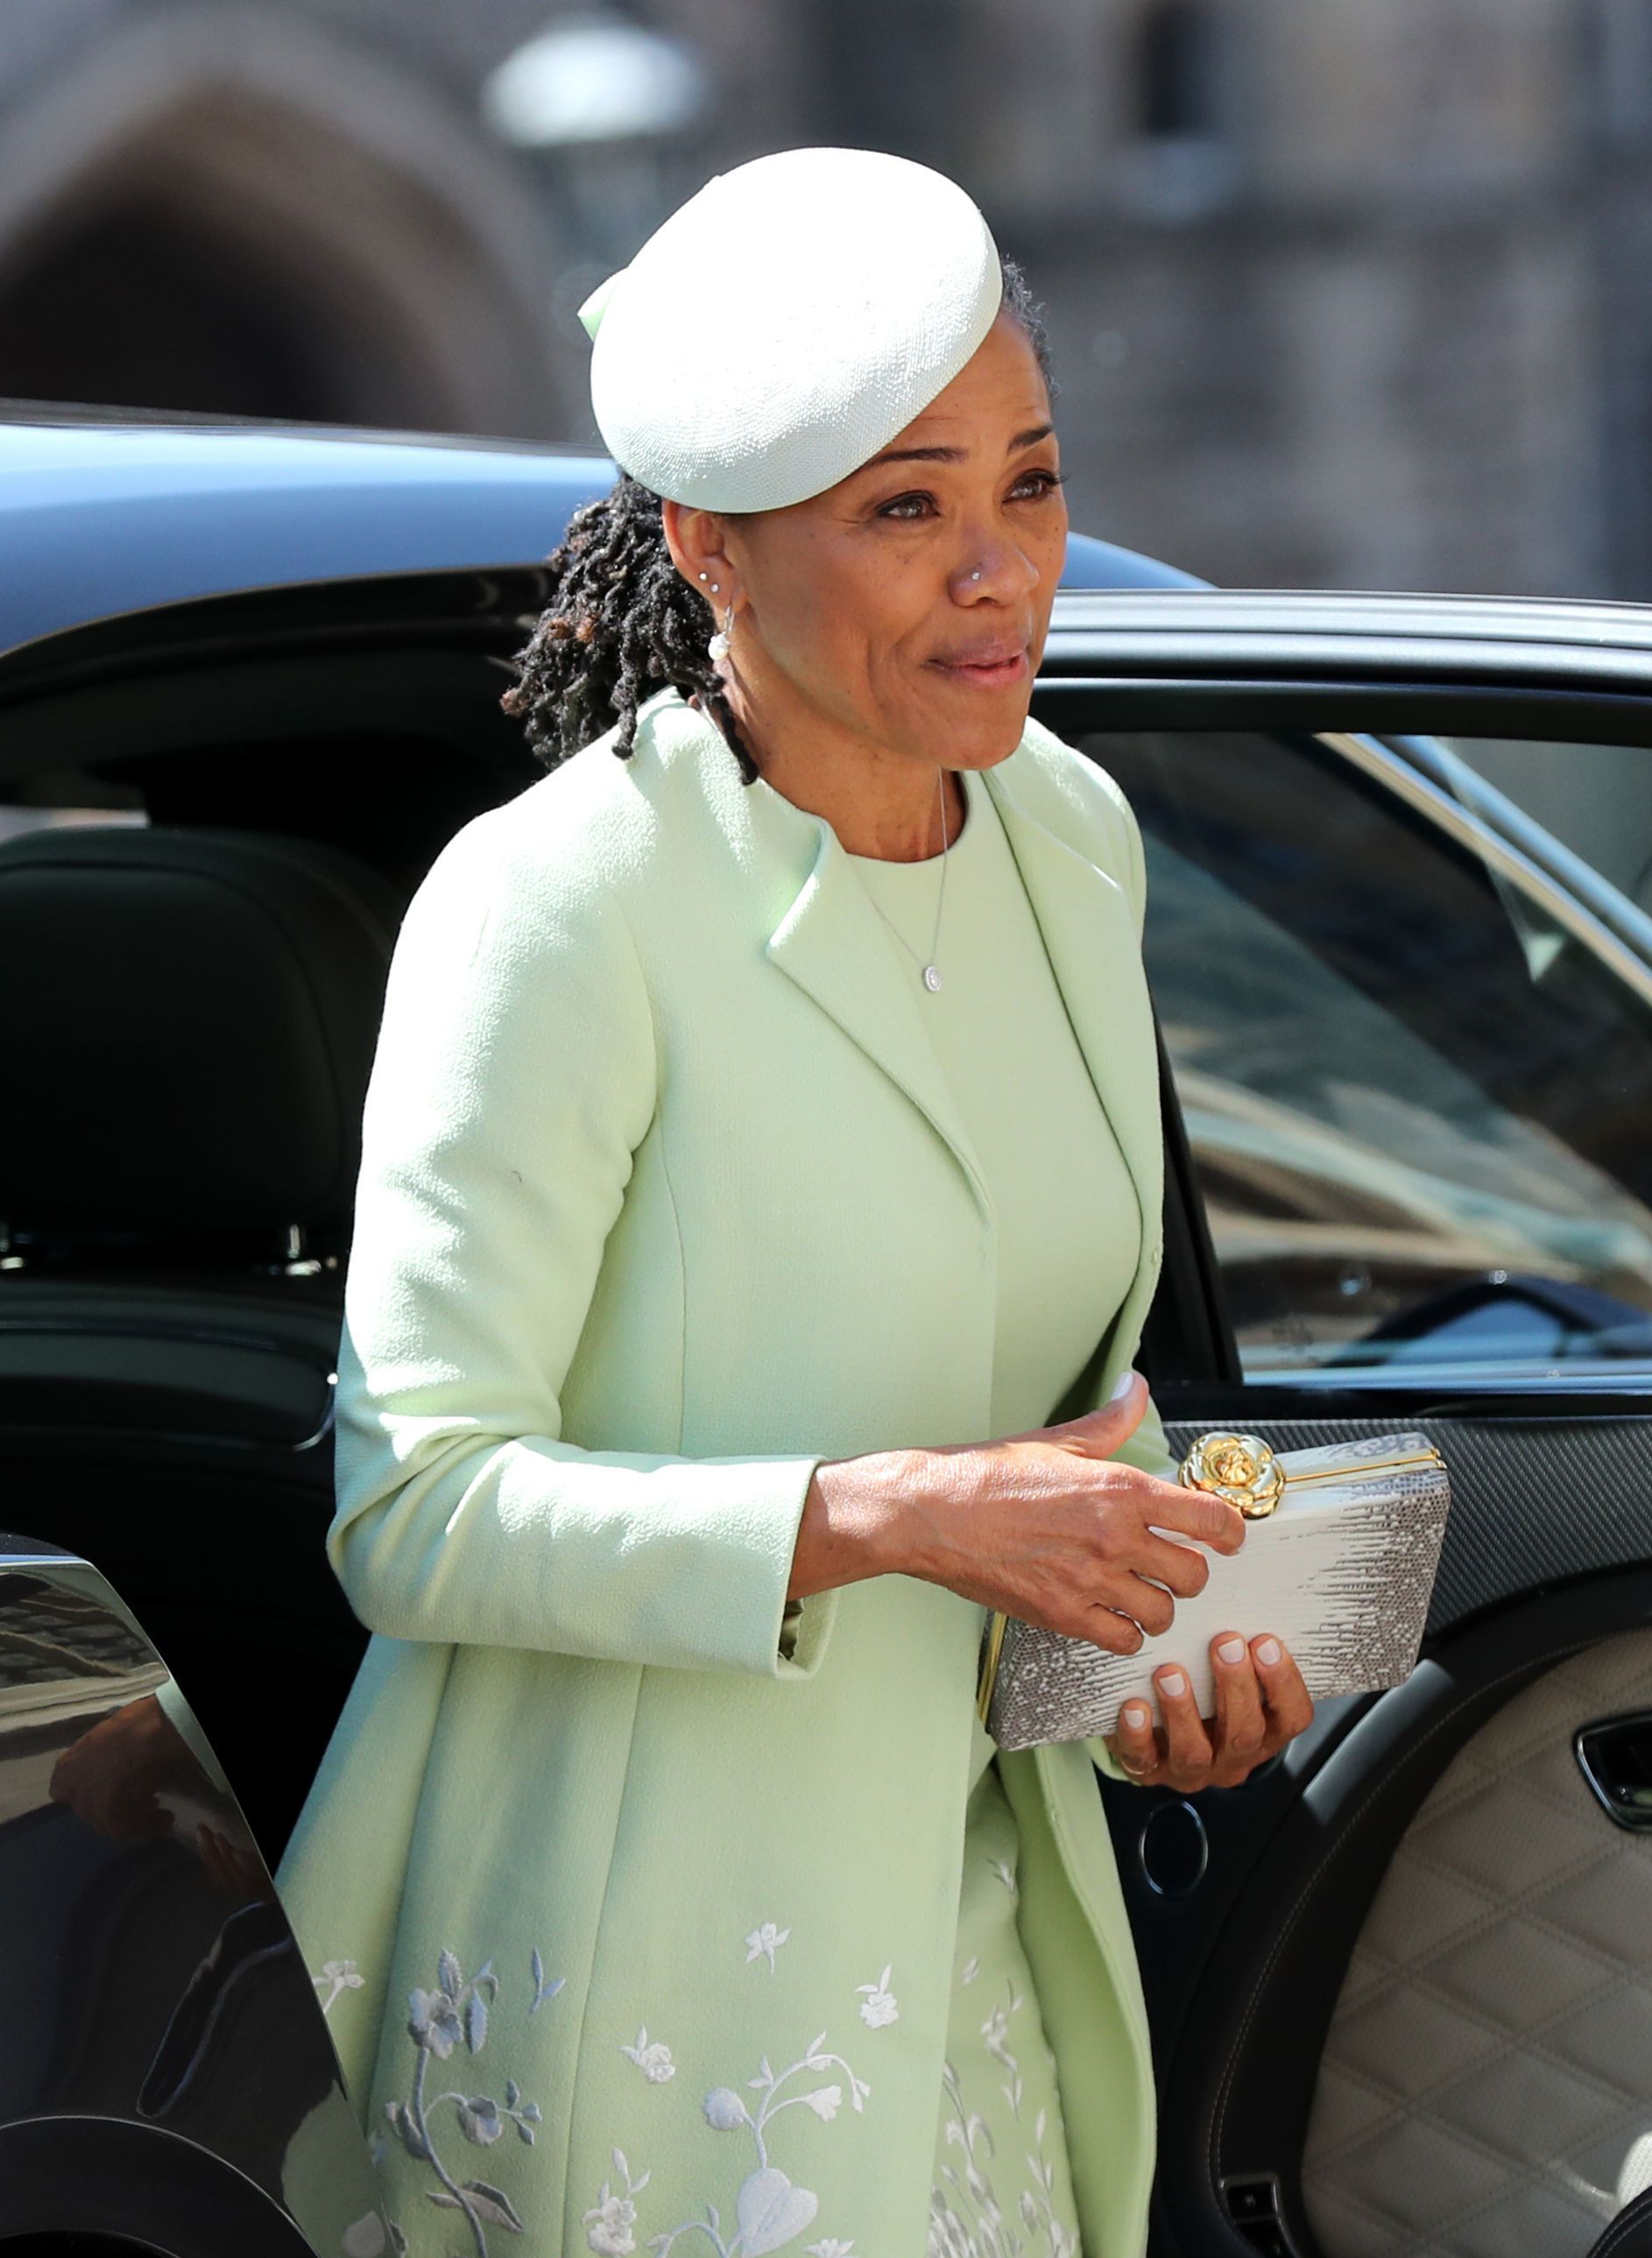 Doria Ragland arrives at St George's Chapel at Windsor Castle on May 19, 2018 | Source: Getty Images